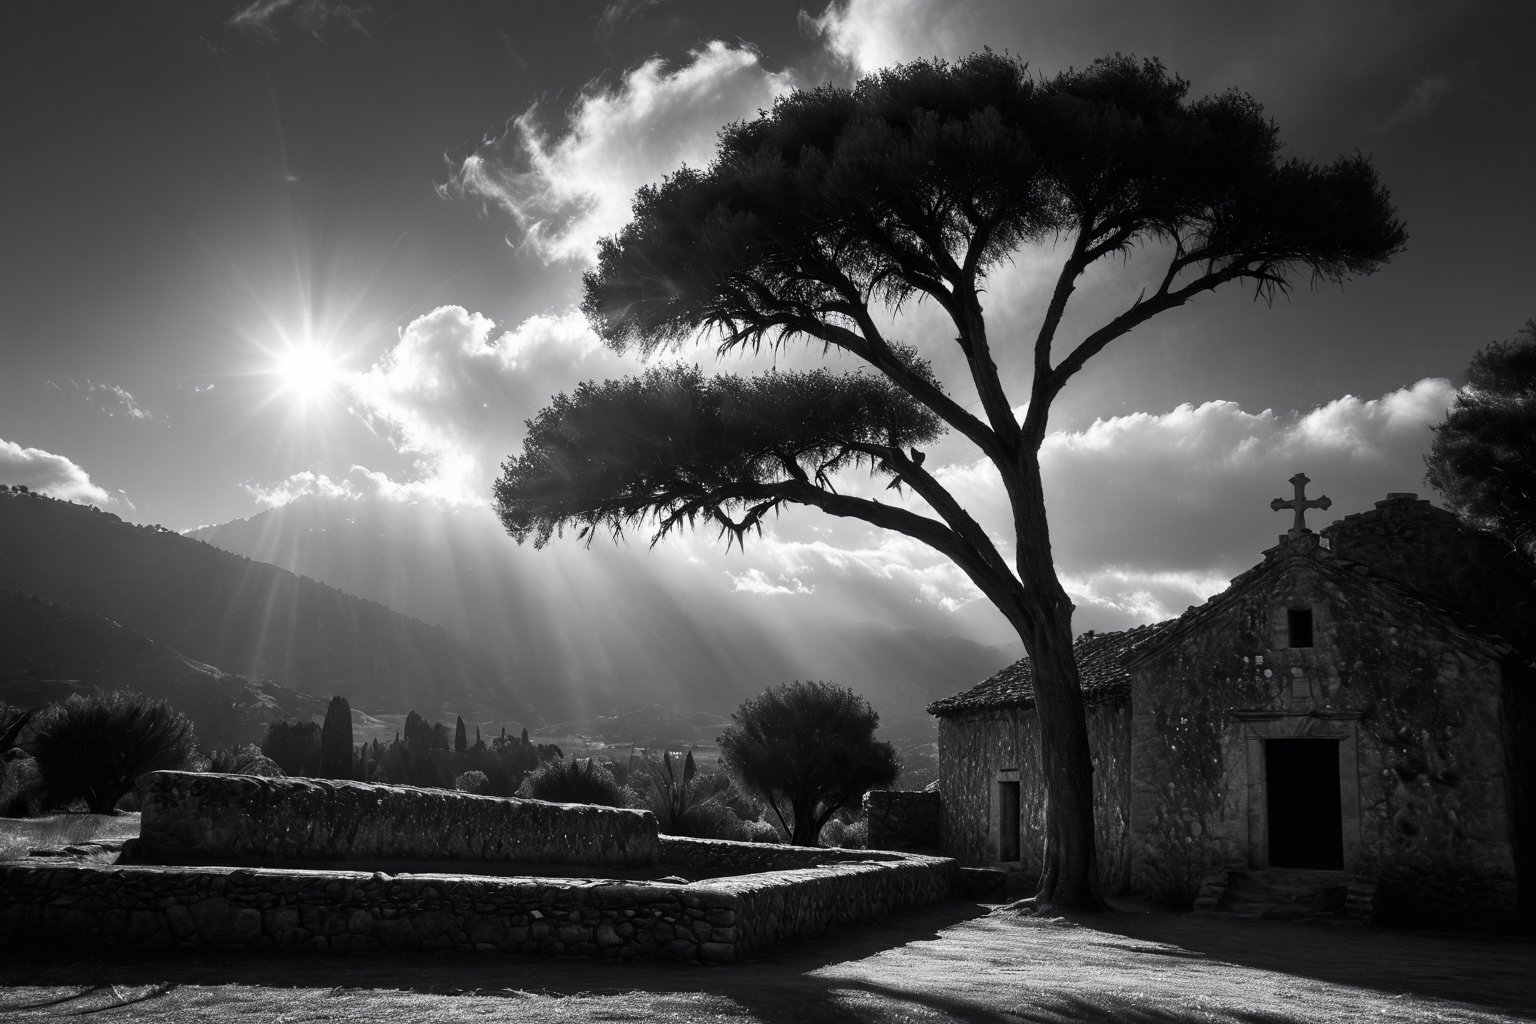 black and white realistic photo, california hill country,   very large rustic stone built spanish mission san jose in the background, detail and vibrant, barroque style, 8k, sunrise,3D, Masterpiece, black and white, infrared exposure, two thirds rule of photography, adam ansel style, cumulus clouds, hills and pine tree, medium perspective, sunlight rays shining through eucalyptus tree, mysterious, SD1.5, offset focus, perspective at 33 degrees, realistic eucalyptus trees and leaves, feng shui style, image subject are balanced